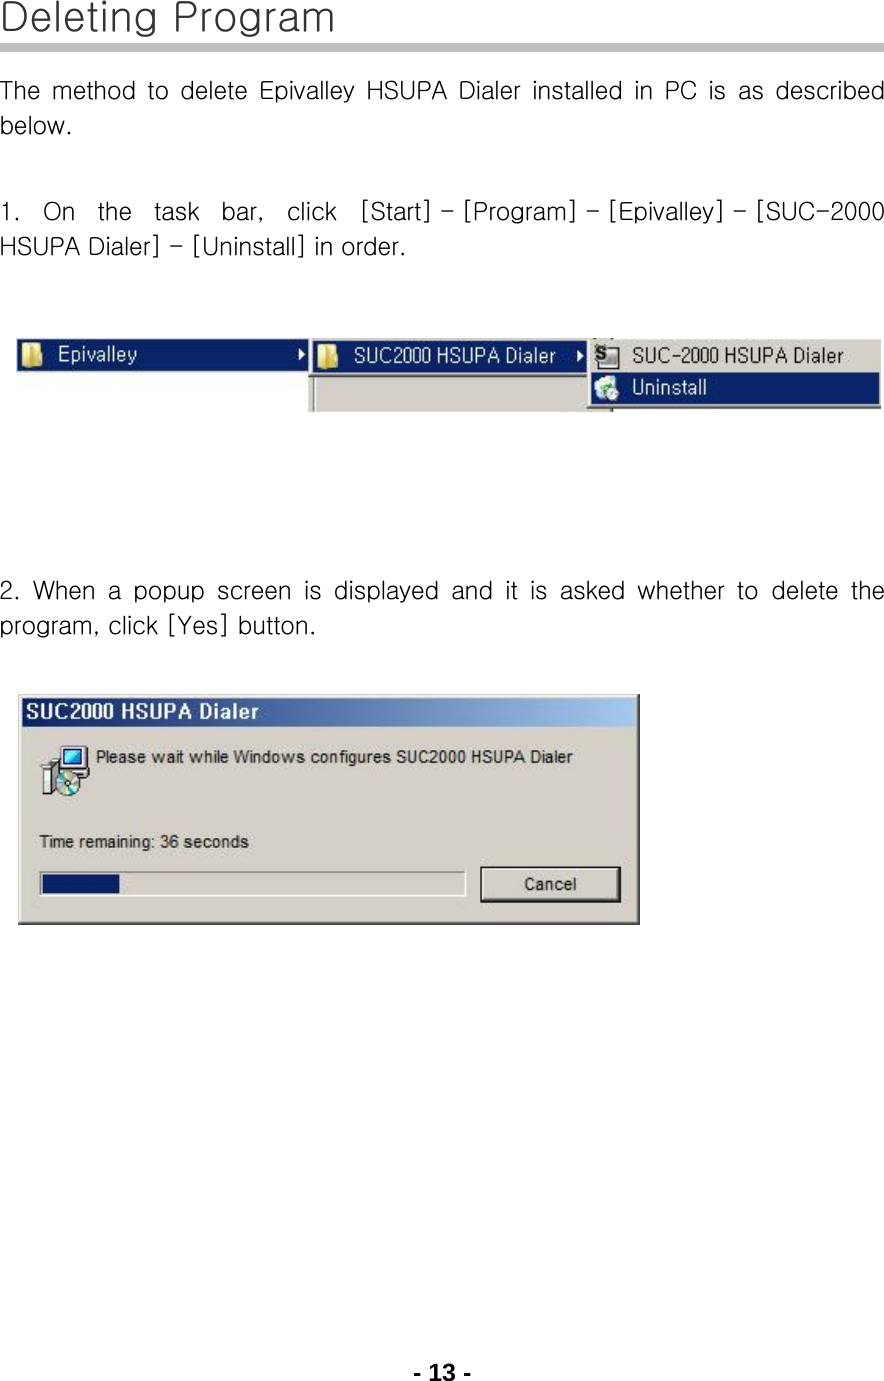 - 13 -  Deleting Program The  method  to  delete  Epivalley  HSUPA  Dialer  installed  in  PC  is  as  described below.  1.  On  the  task  bar,  click  [Start] - [Program] - [Epivalley] - [SUC-2000 HSUPA Dialer] - [Uninstall] in order.        2.  When  a  popup  screen  is  displayed  and  it  is  asked  whether  to  delete  the program, click [Yes] button.         